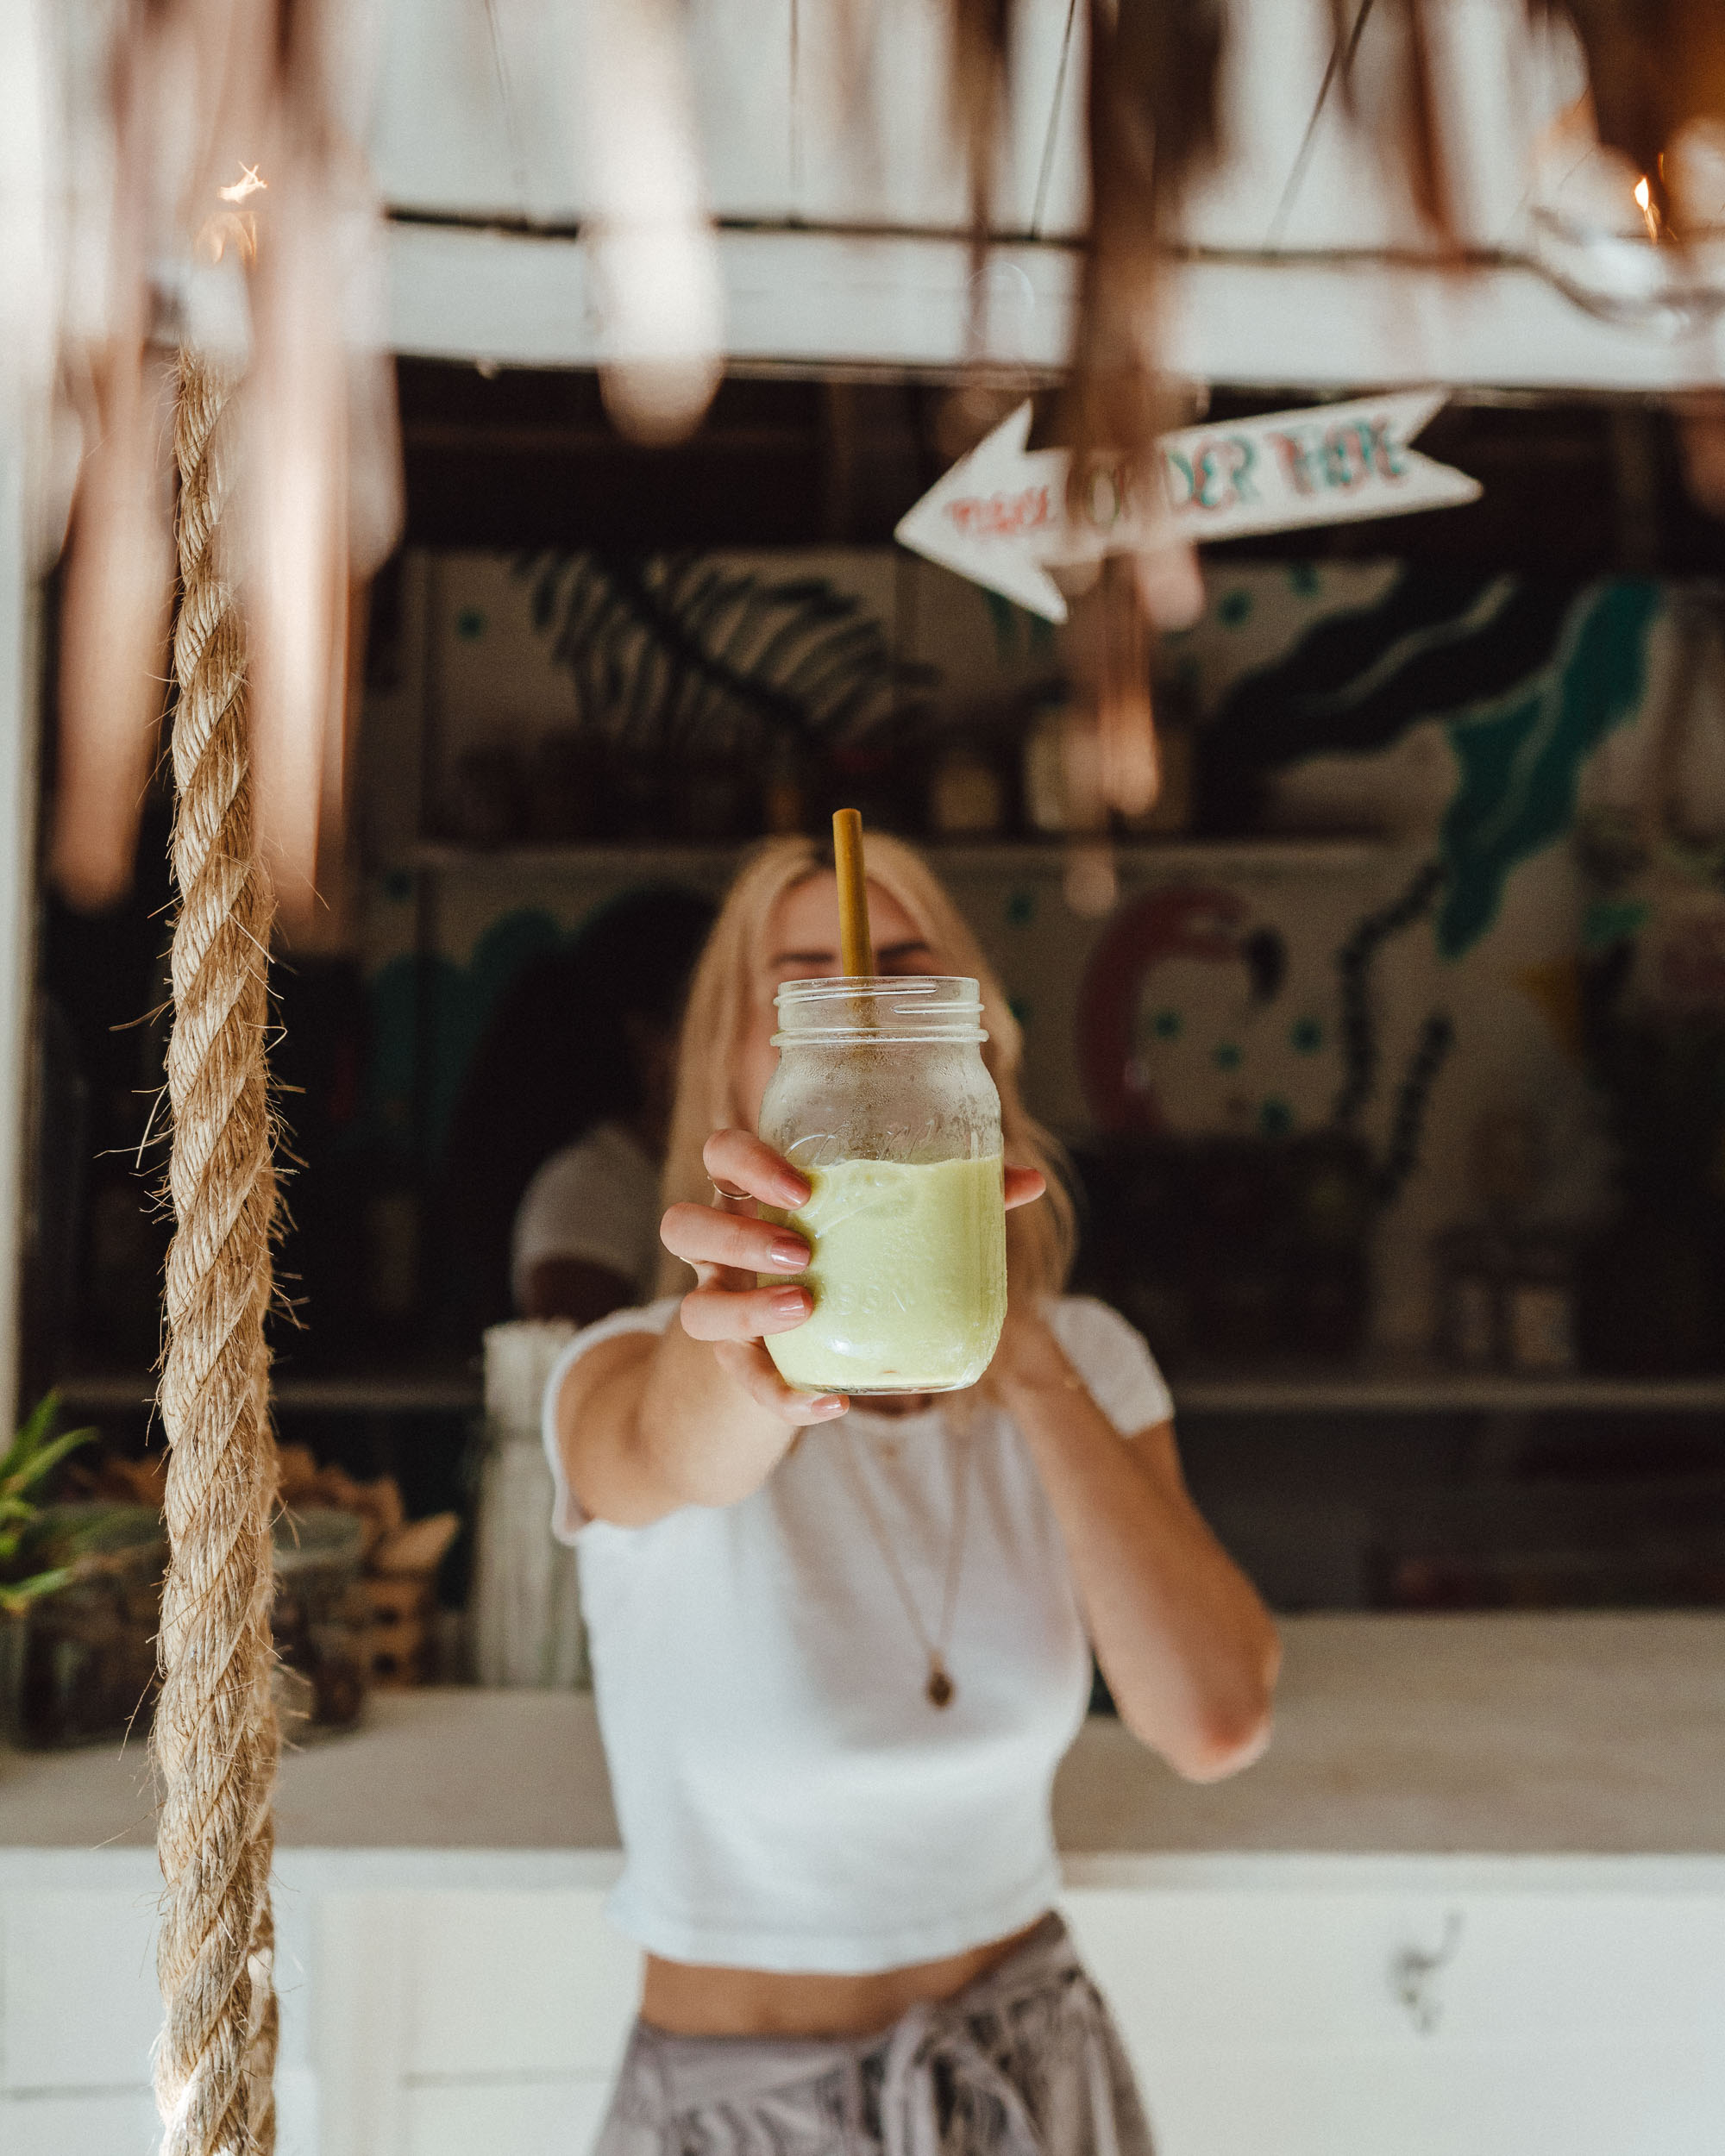 Matcha Mama in Tulum Quintana Roo Mexico via Find Us Lost